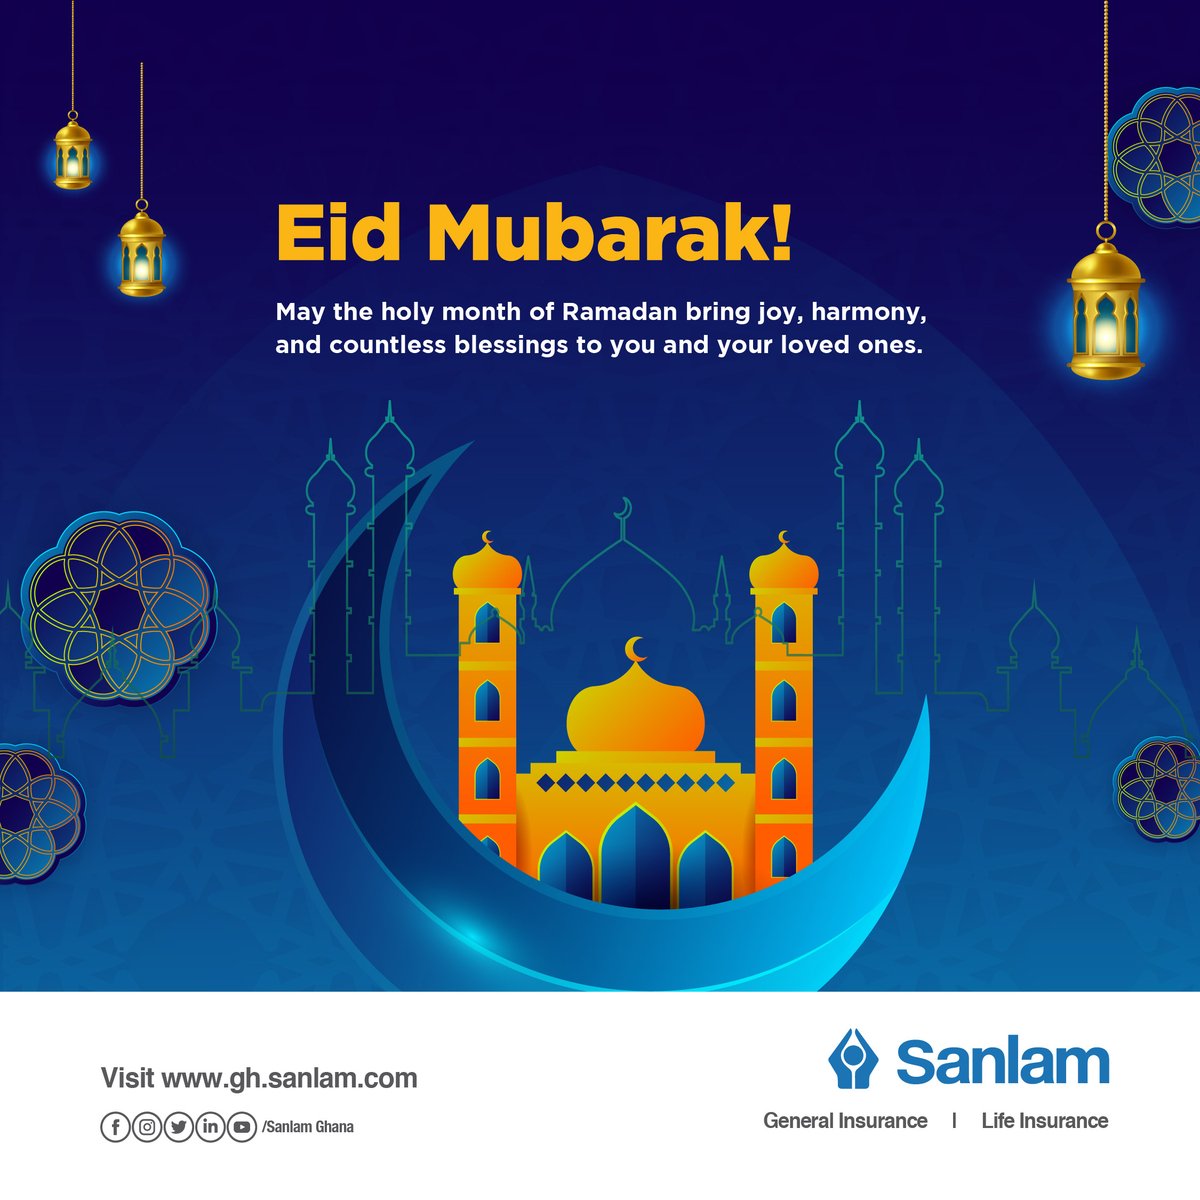 Eid Mubarak to all our Muslim families!
May you and your loved ones find peace, serenity, and clarity this sacred month.

#SanlamGhana
#livewithconfidence💙
#holymonth🌙
#Ramadan